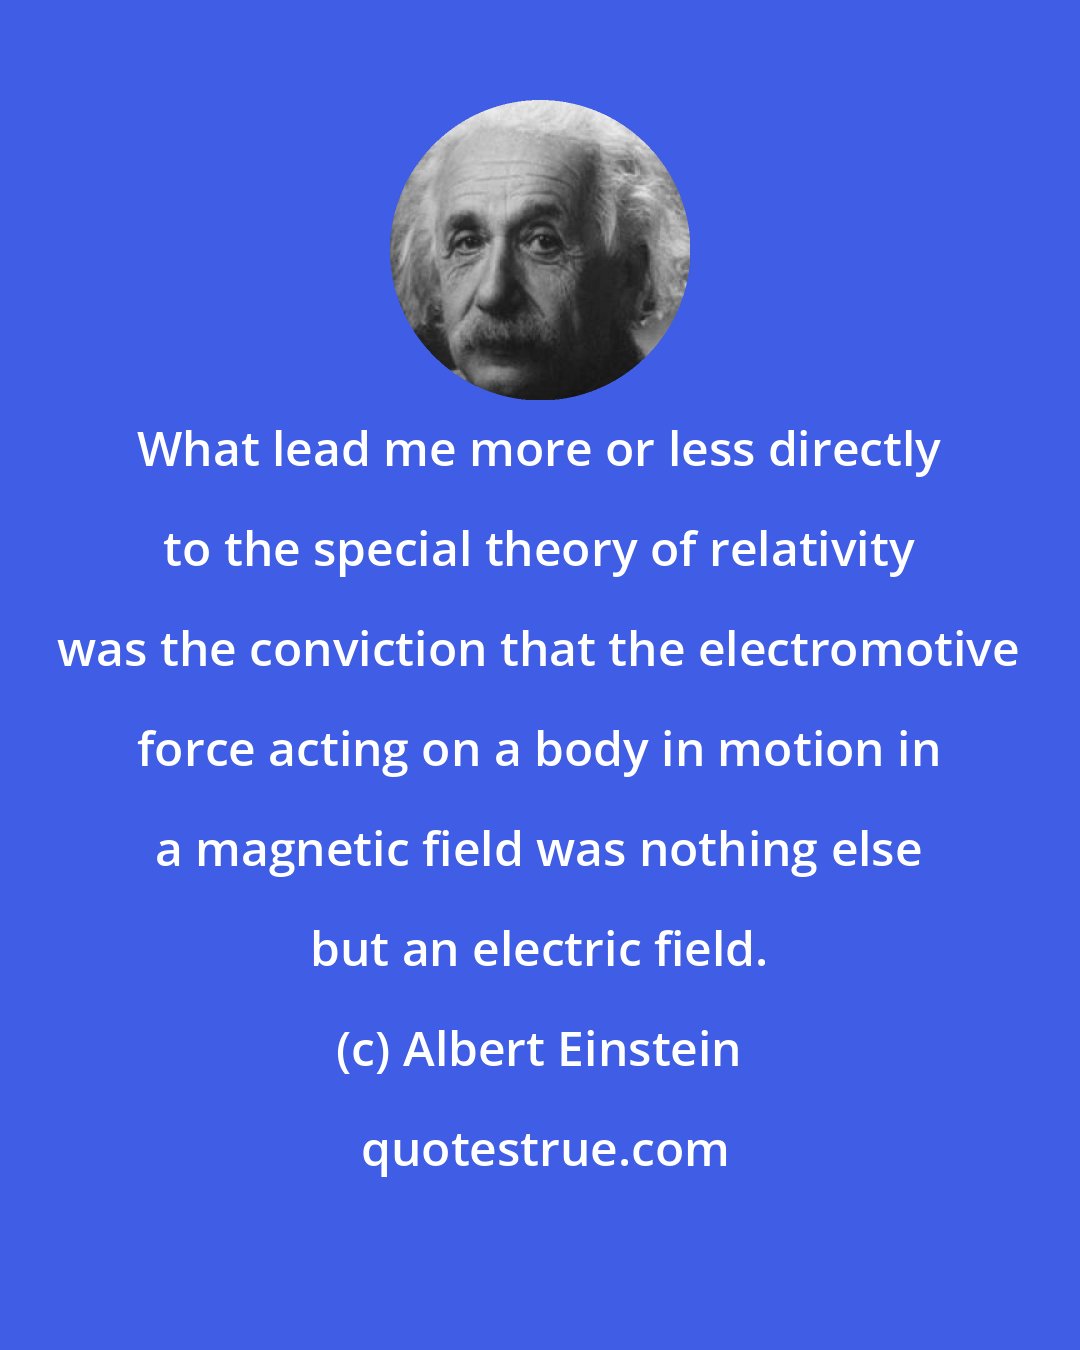 Albert Einstein: What lead me more or less directly to the special theory of relativity was the conviction that the electromotive force acting on a body in motion in a magnetic field was nothing else but an electric field.